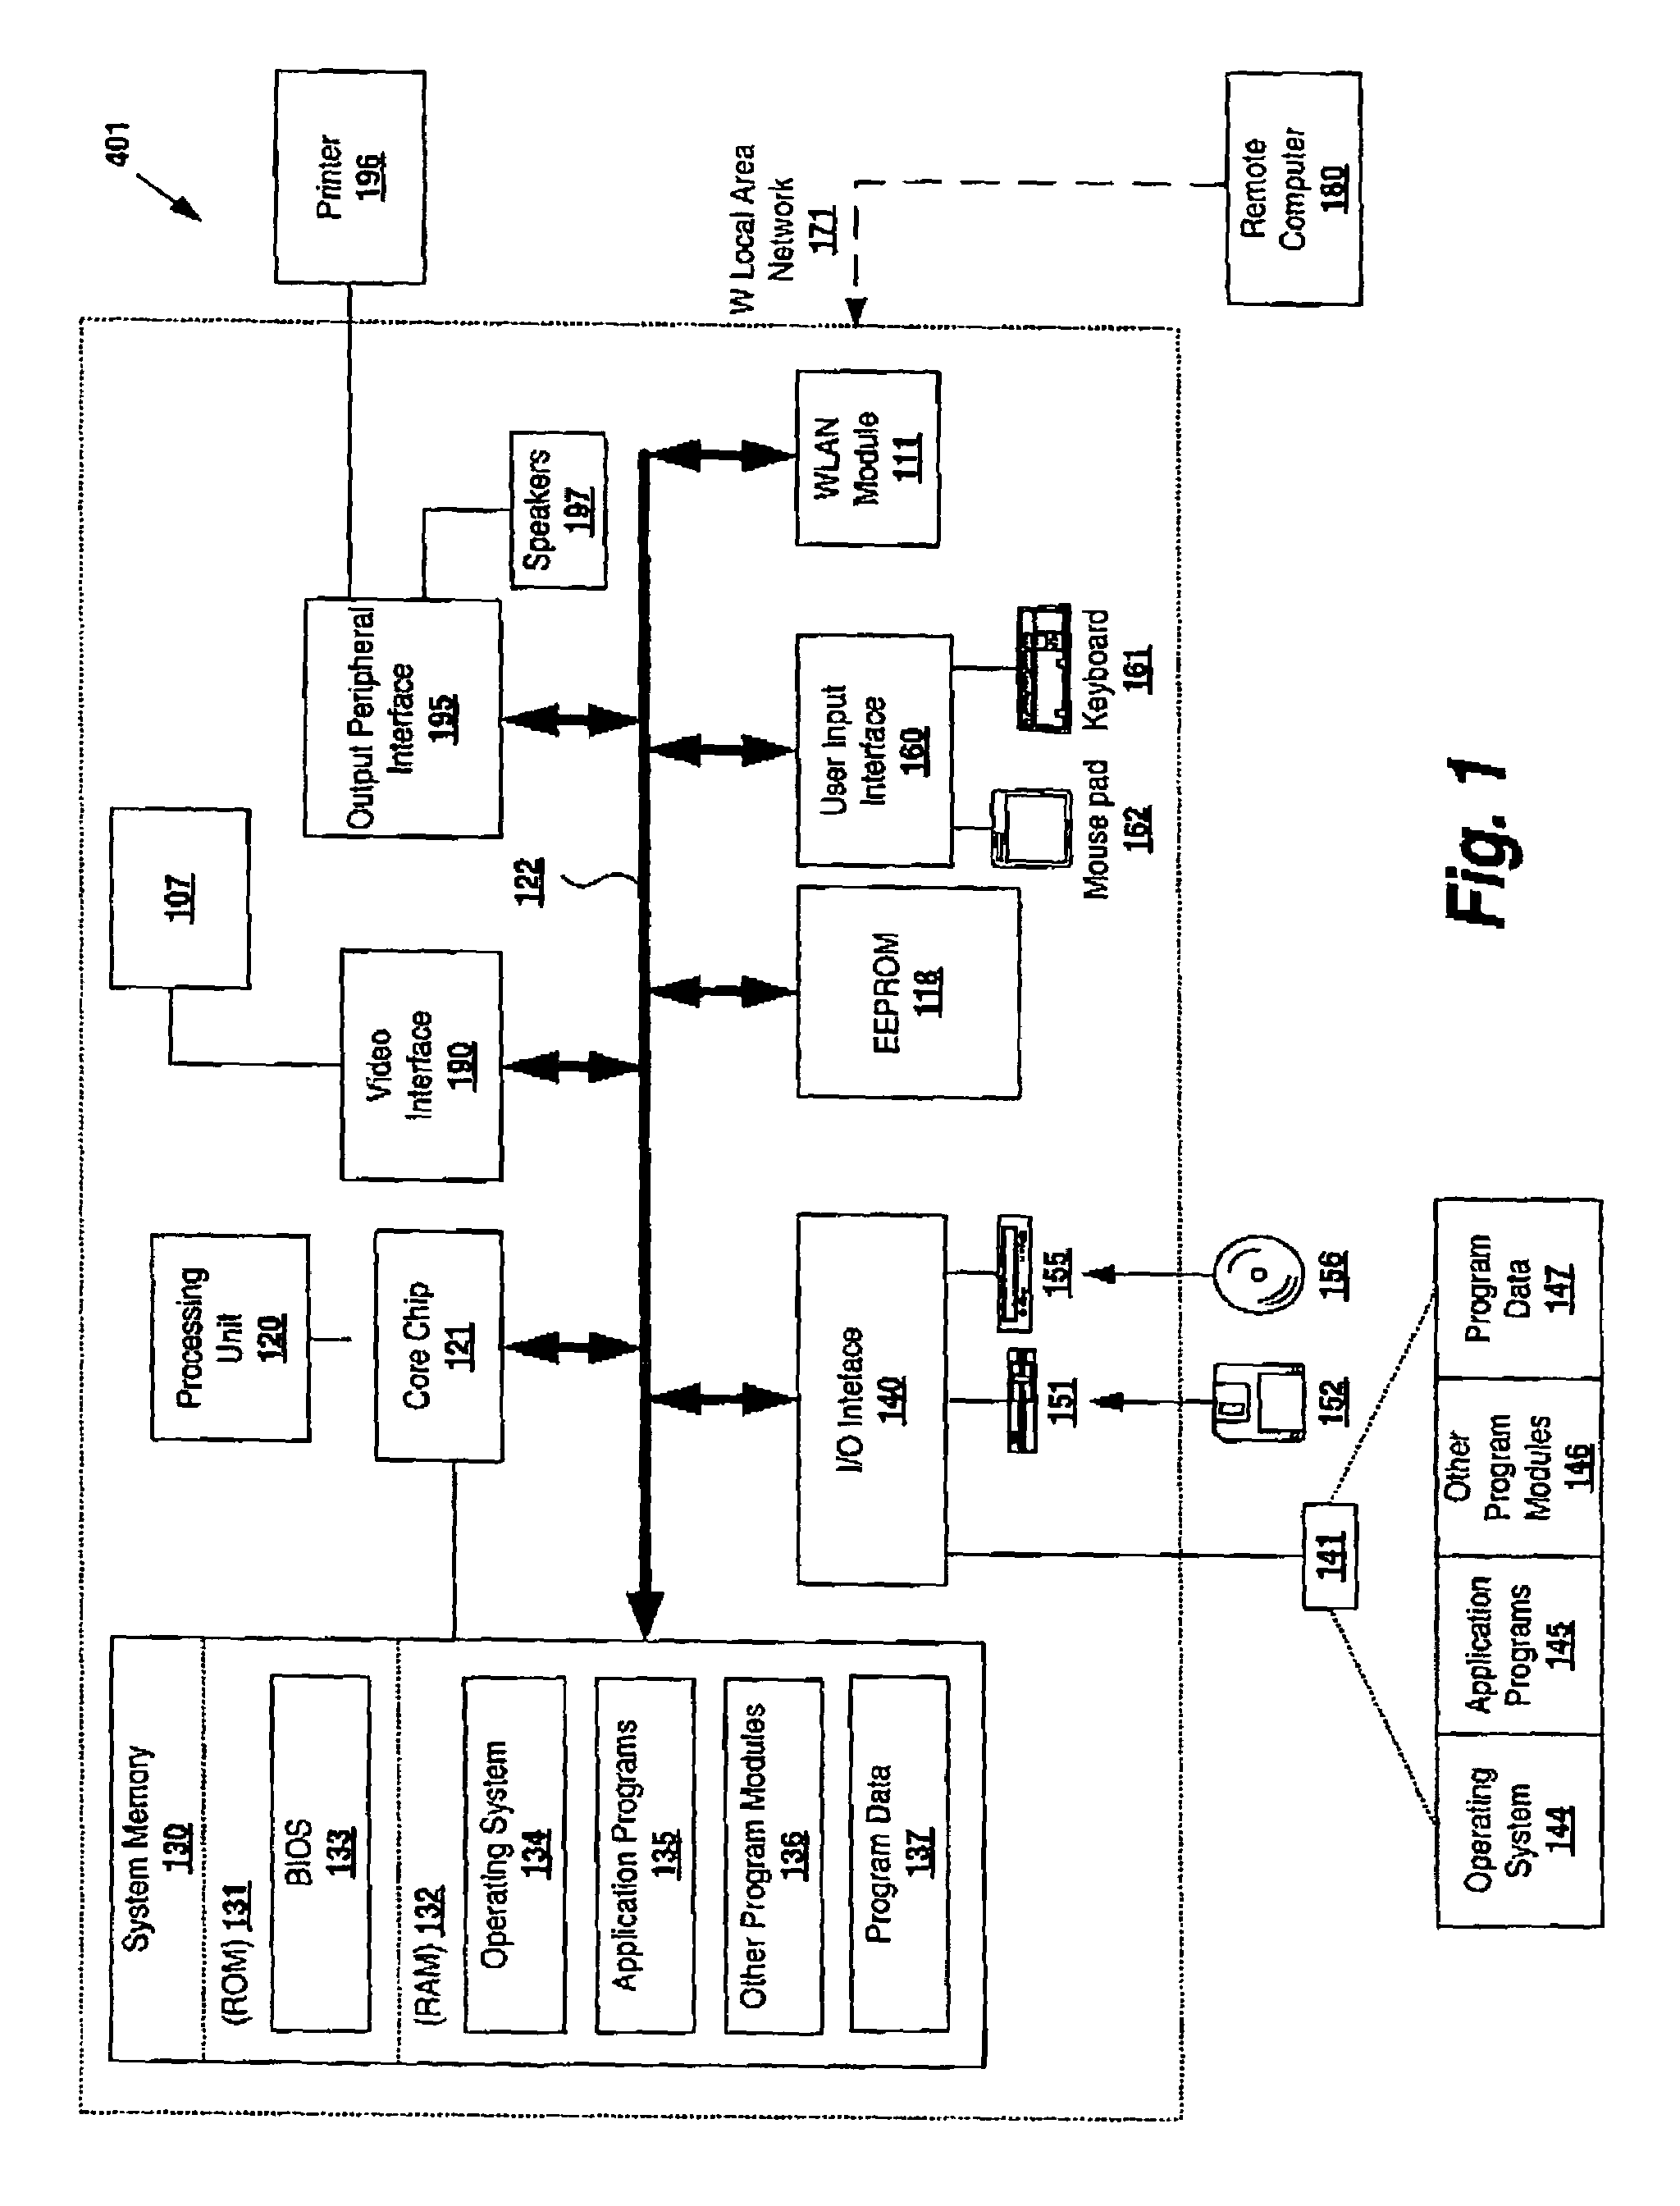 System and method for passive scanning of authorized wireless channels